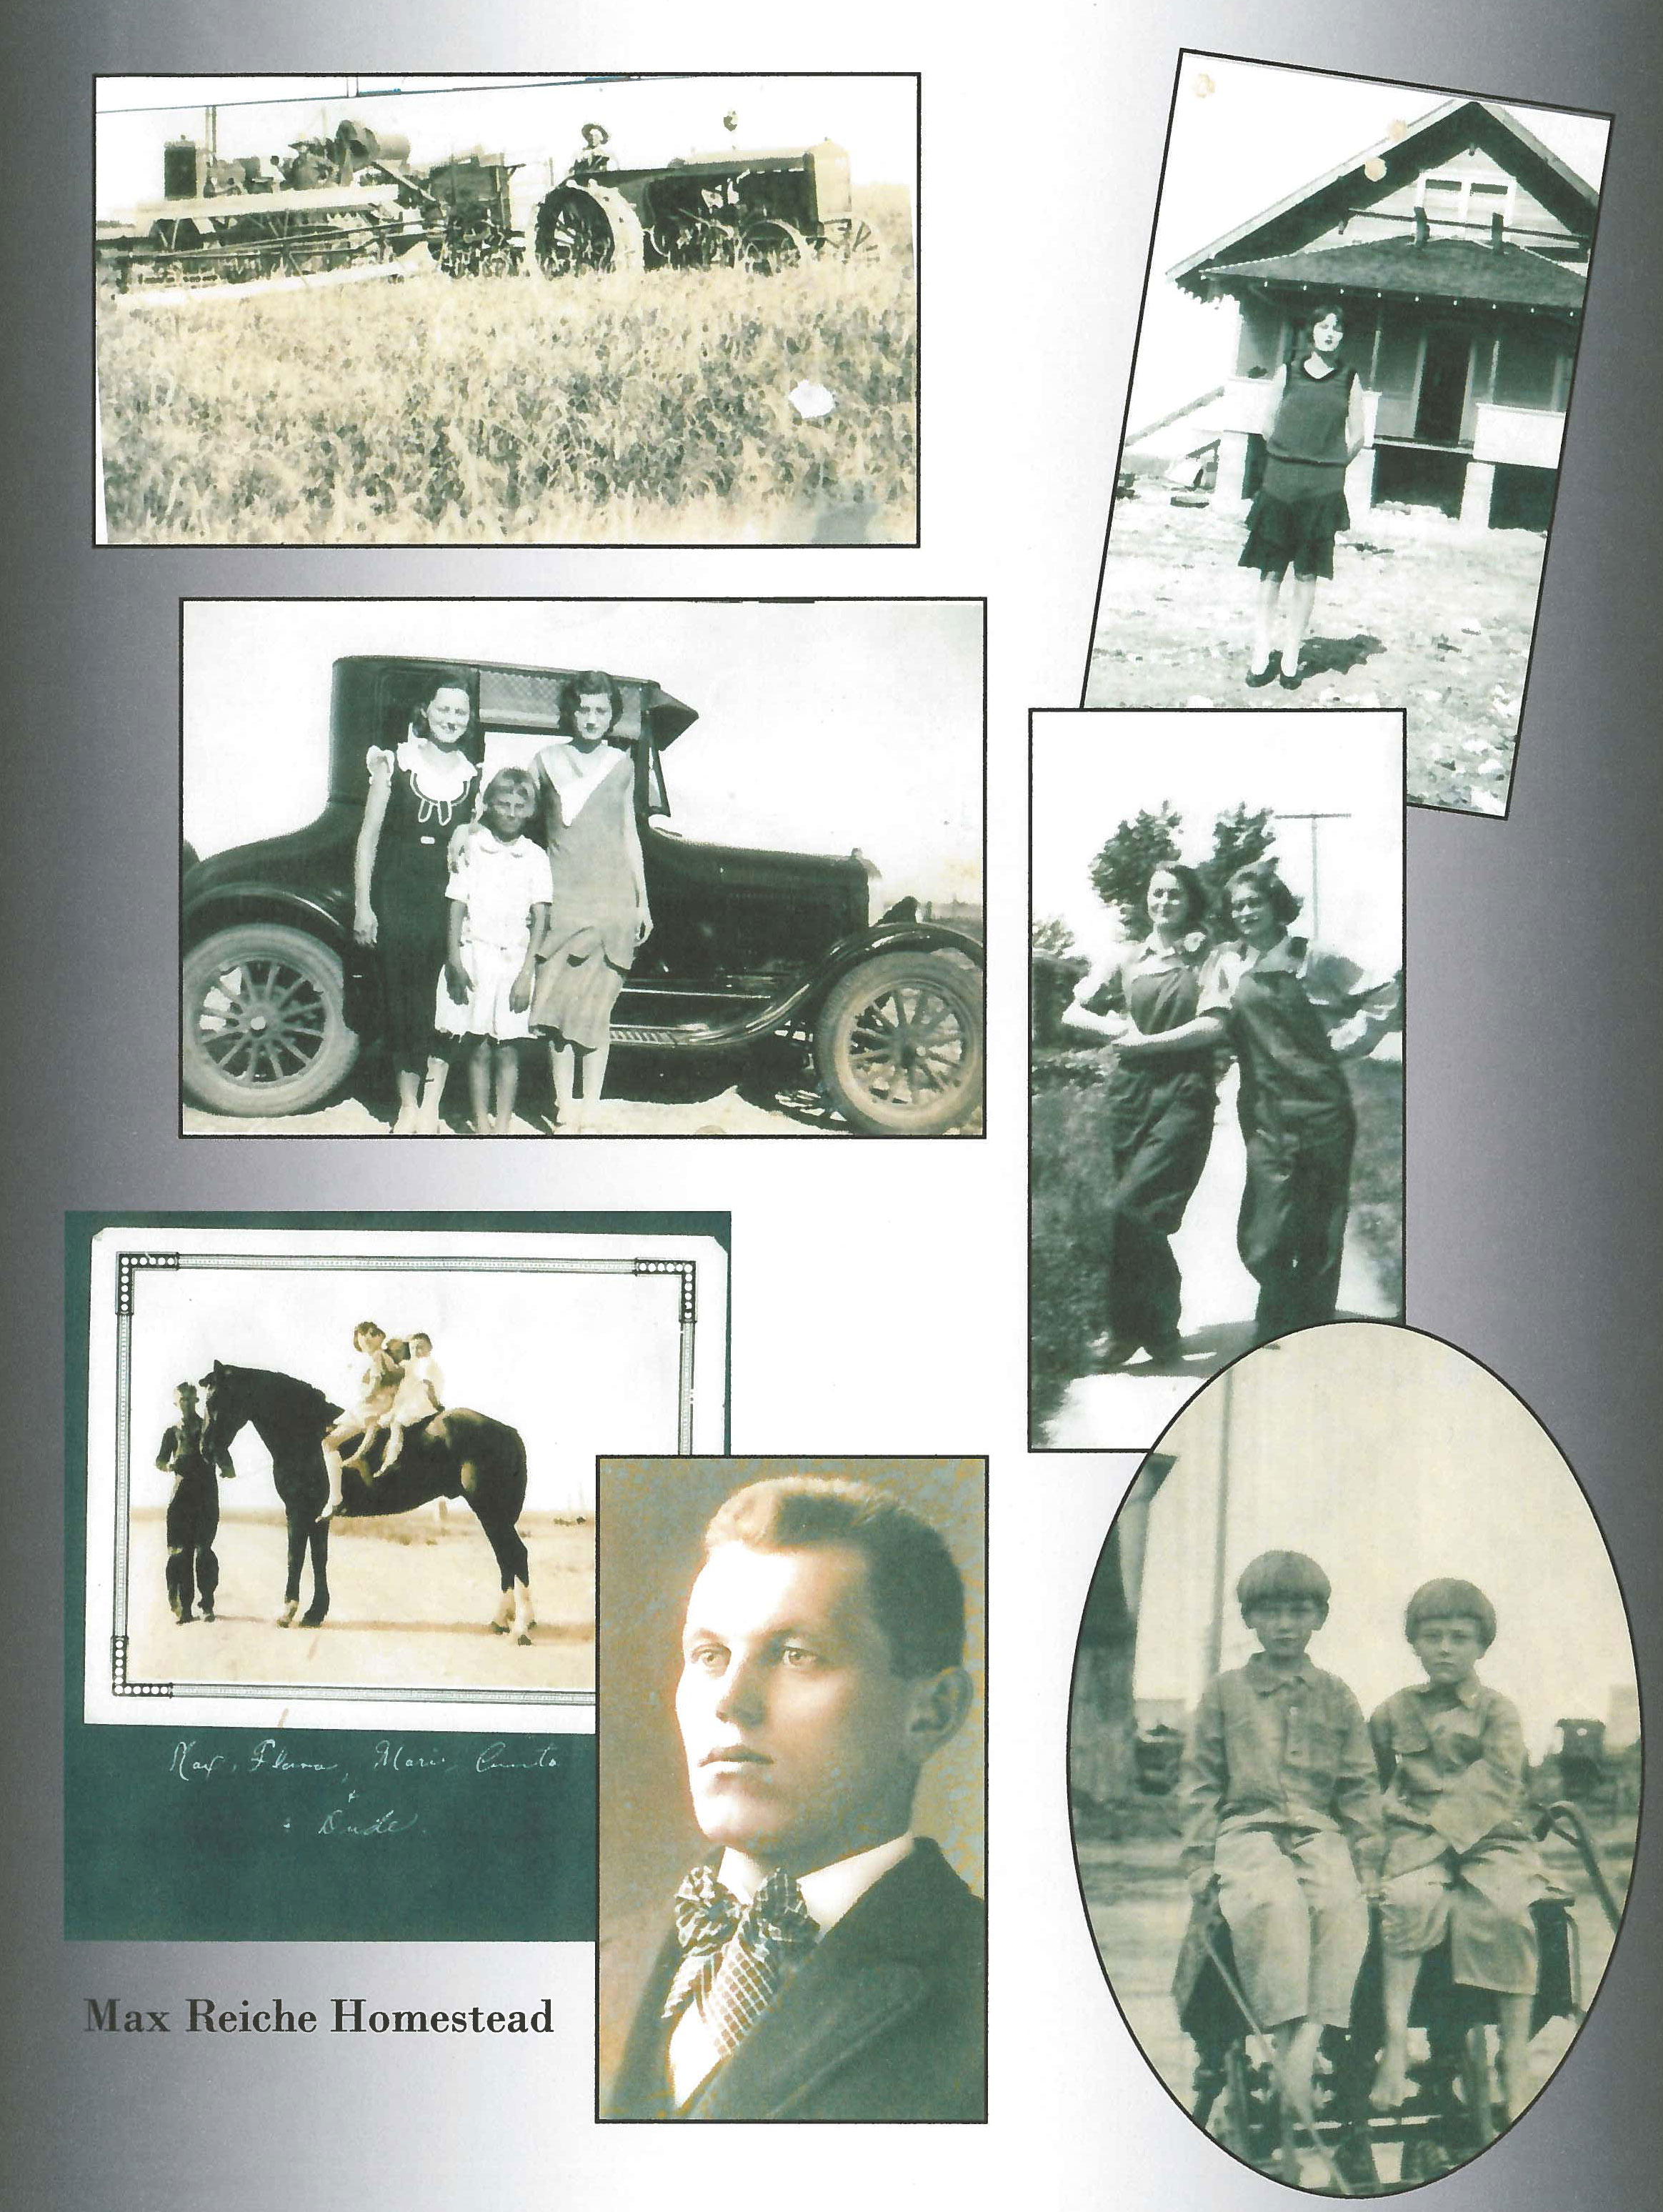 Page of historic images from the Max Reiche Homestead.